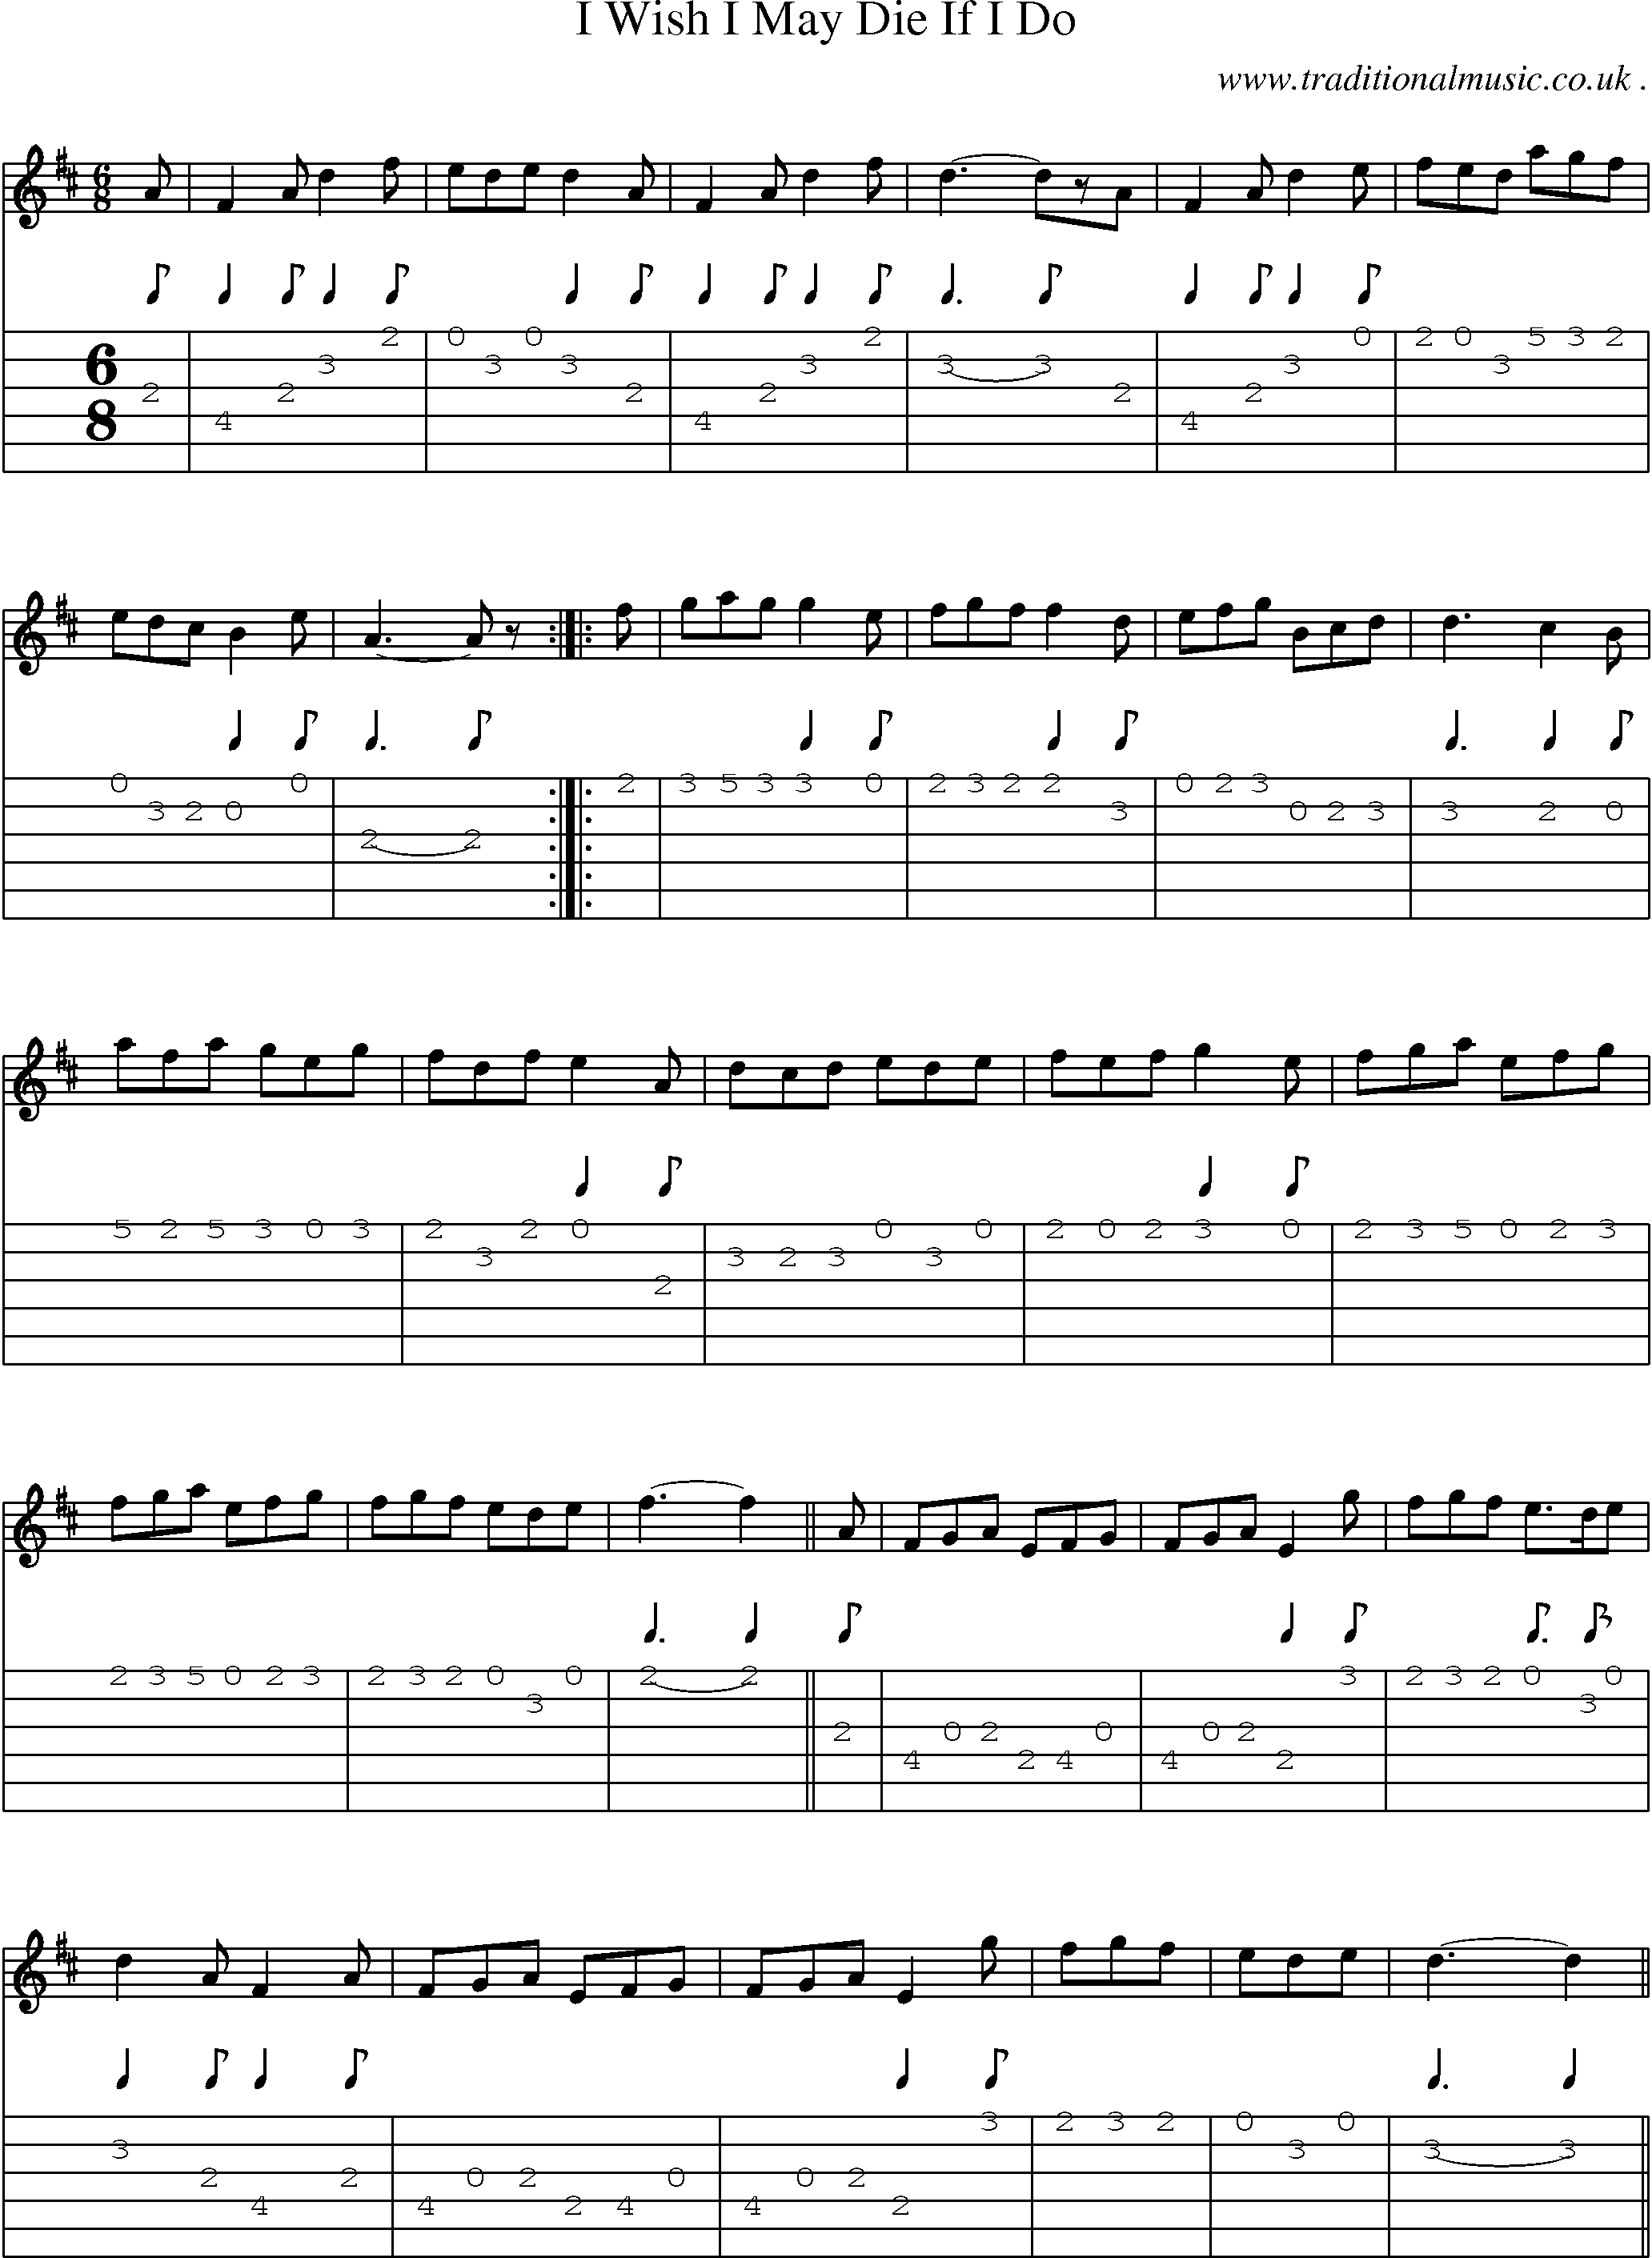 Sheet-Music and Guitar Tabs for I Wish I May Die If I Do